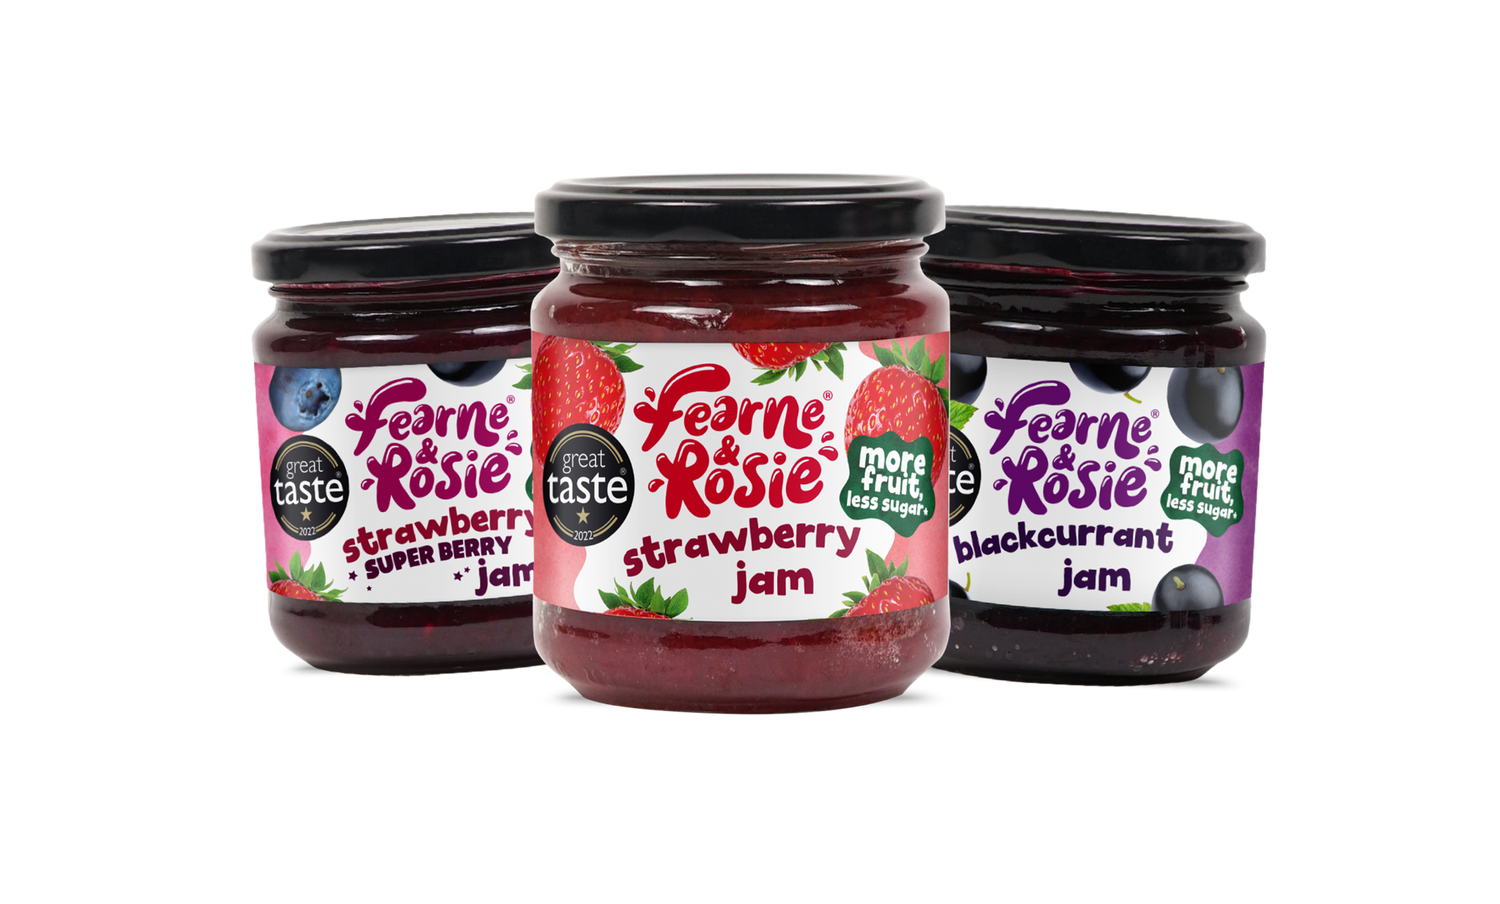 The Superberry, Strawberry and Blackcurrant Fearne & Rosie products